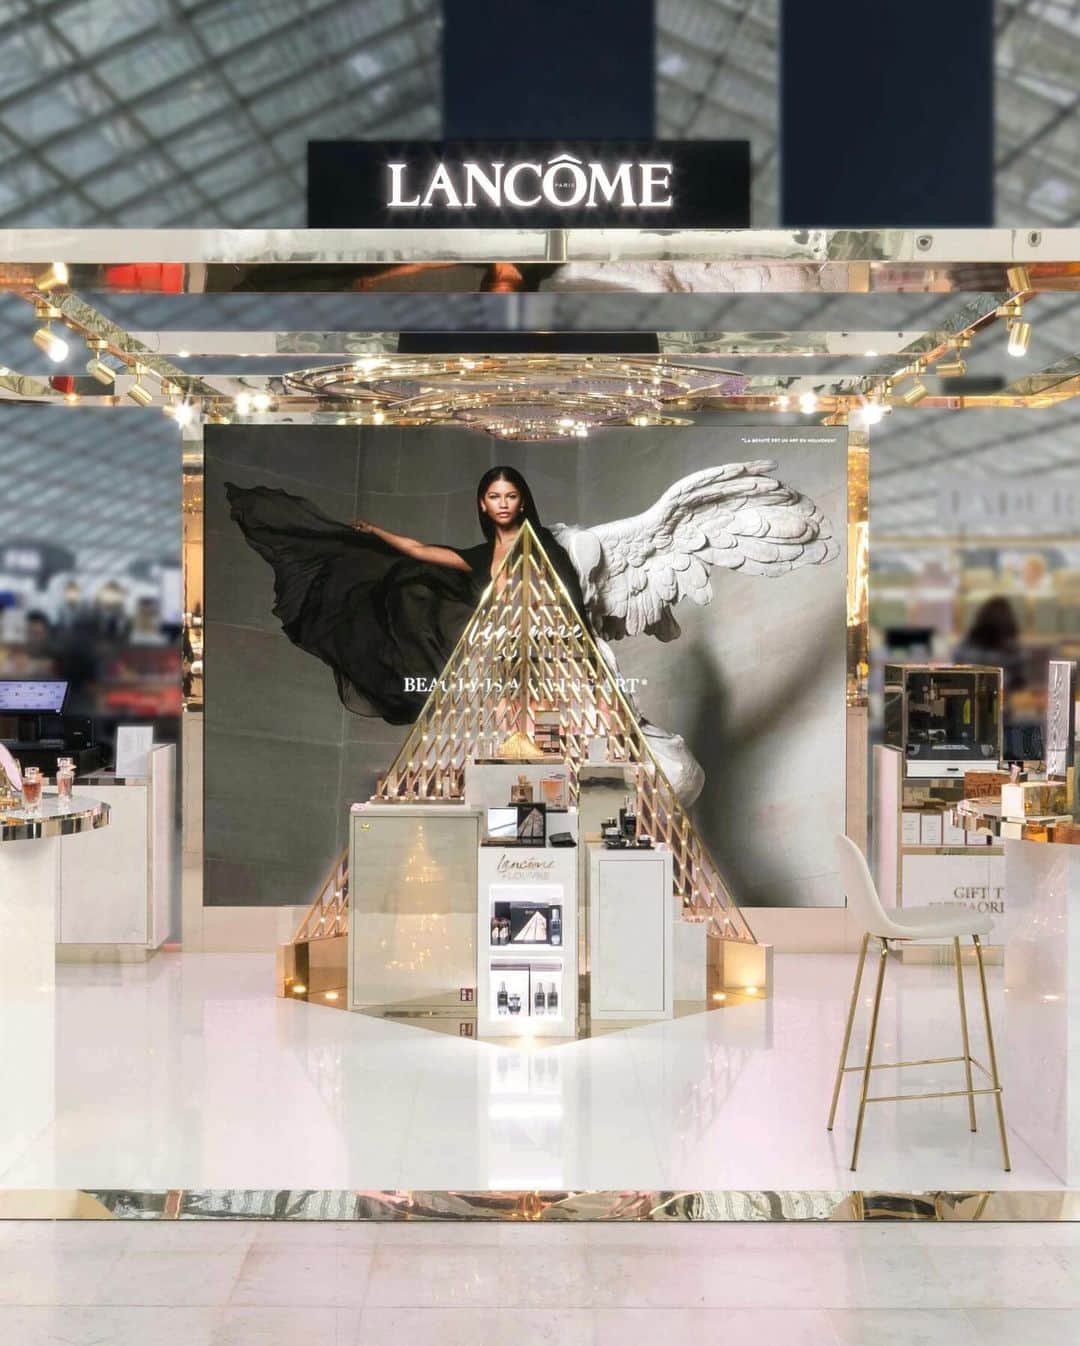 Lancôme Officialのインスタグラム：「Beauty and art resonate across time beyond eras, geographies, and cultures. Lancôme invites you to dive into the artistic history of the Louvre at the exclusive Lancôme x Louvre popup display store, located at the Paris Charles de Gaulle airport. Visitors are invited to discover the limited-edition collection as they step into an immersive space inspired by the Louvre’s iconic architecture with its smooth marble and stone columns, golden finishes and Lancôme’s iconic rose.  #Lancome #LancomexLouvre #LancomeFR #Holiday23」